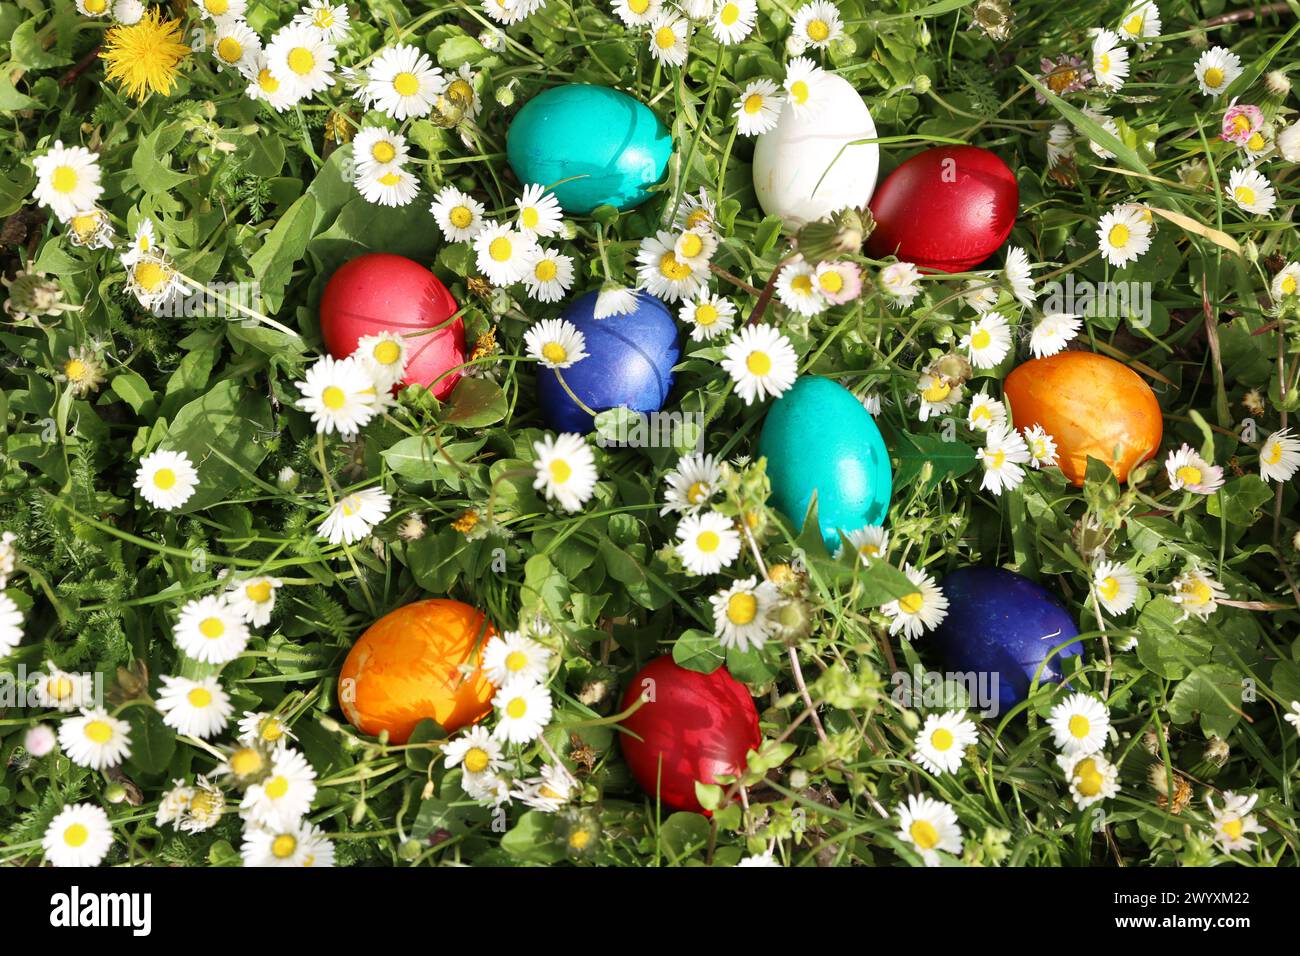 Closeup of colorful eggs in beautiful spring meadow on easter holiday outdoors in green graas.Traditional symbol for christian and catholic holiday. E Stock Photo